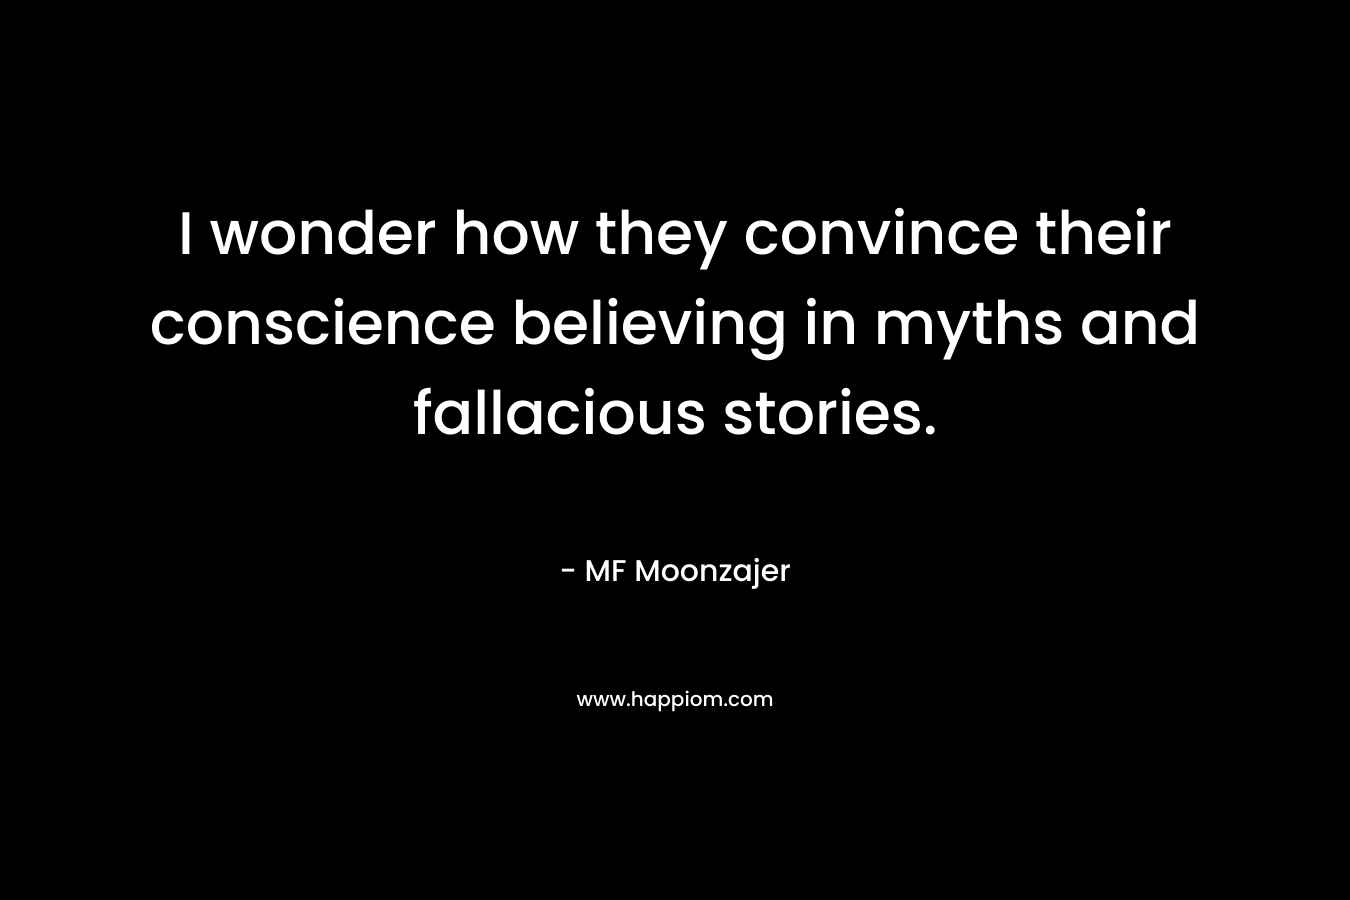 I wonder how they convince their conscience believing in myths and fallacious stories. – MF Moonzajer